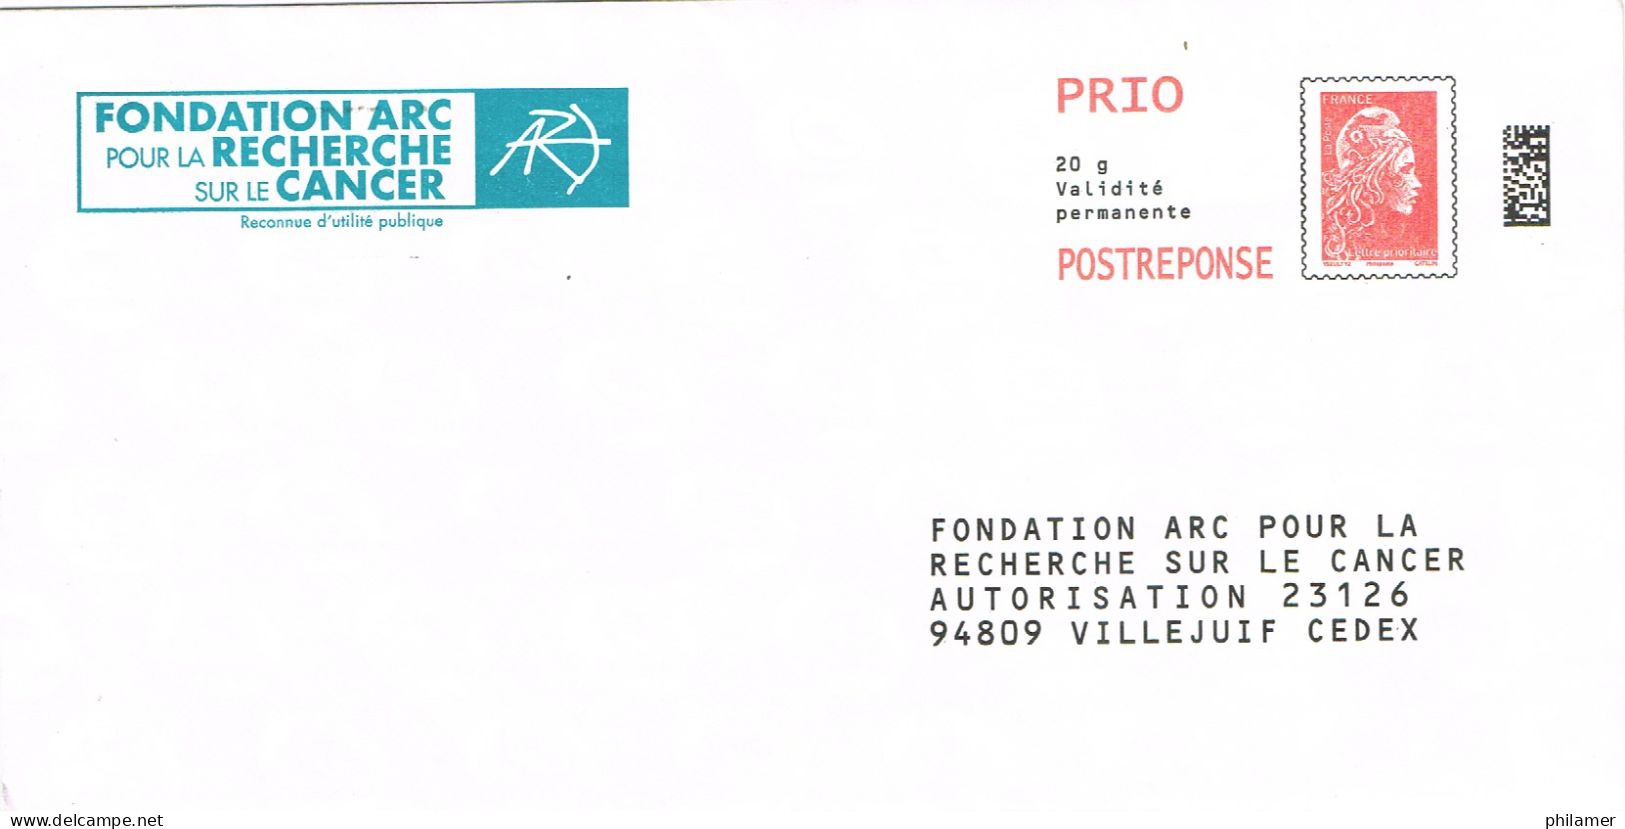 France ENTIER POSTAL STATIONERY PRET A POSTER MARIANNE FONDATION ARC RECHERCHE CANCER POSTREPONSE NEUVE BE - PAP: Antwoord